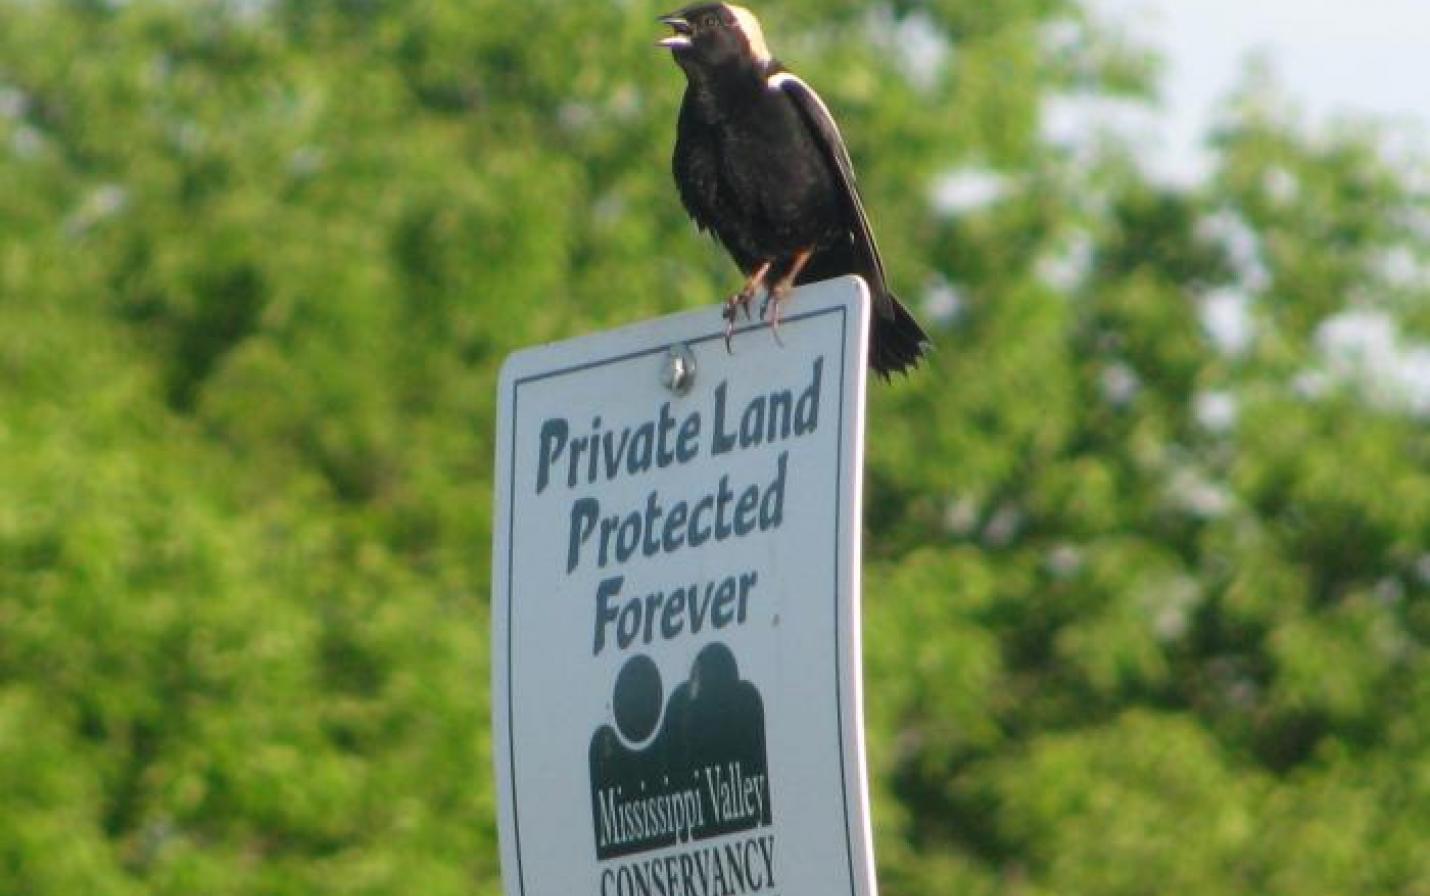 Bobolink perched on a protected land sign